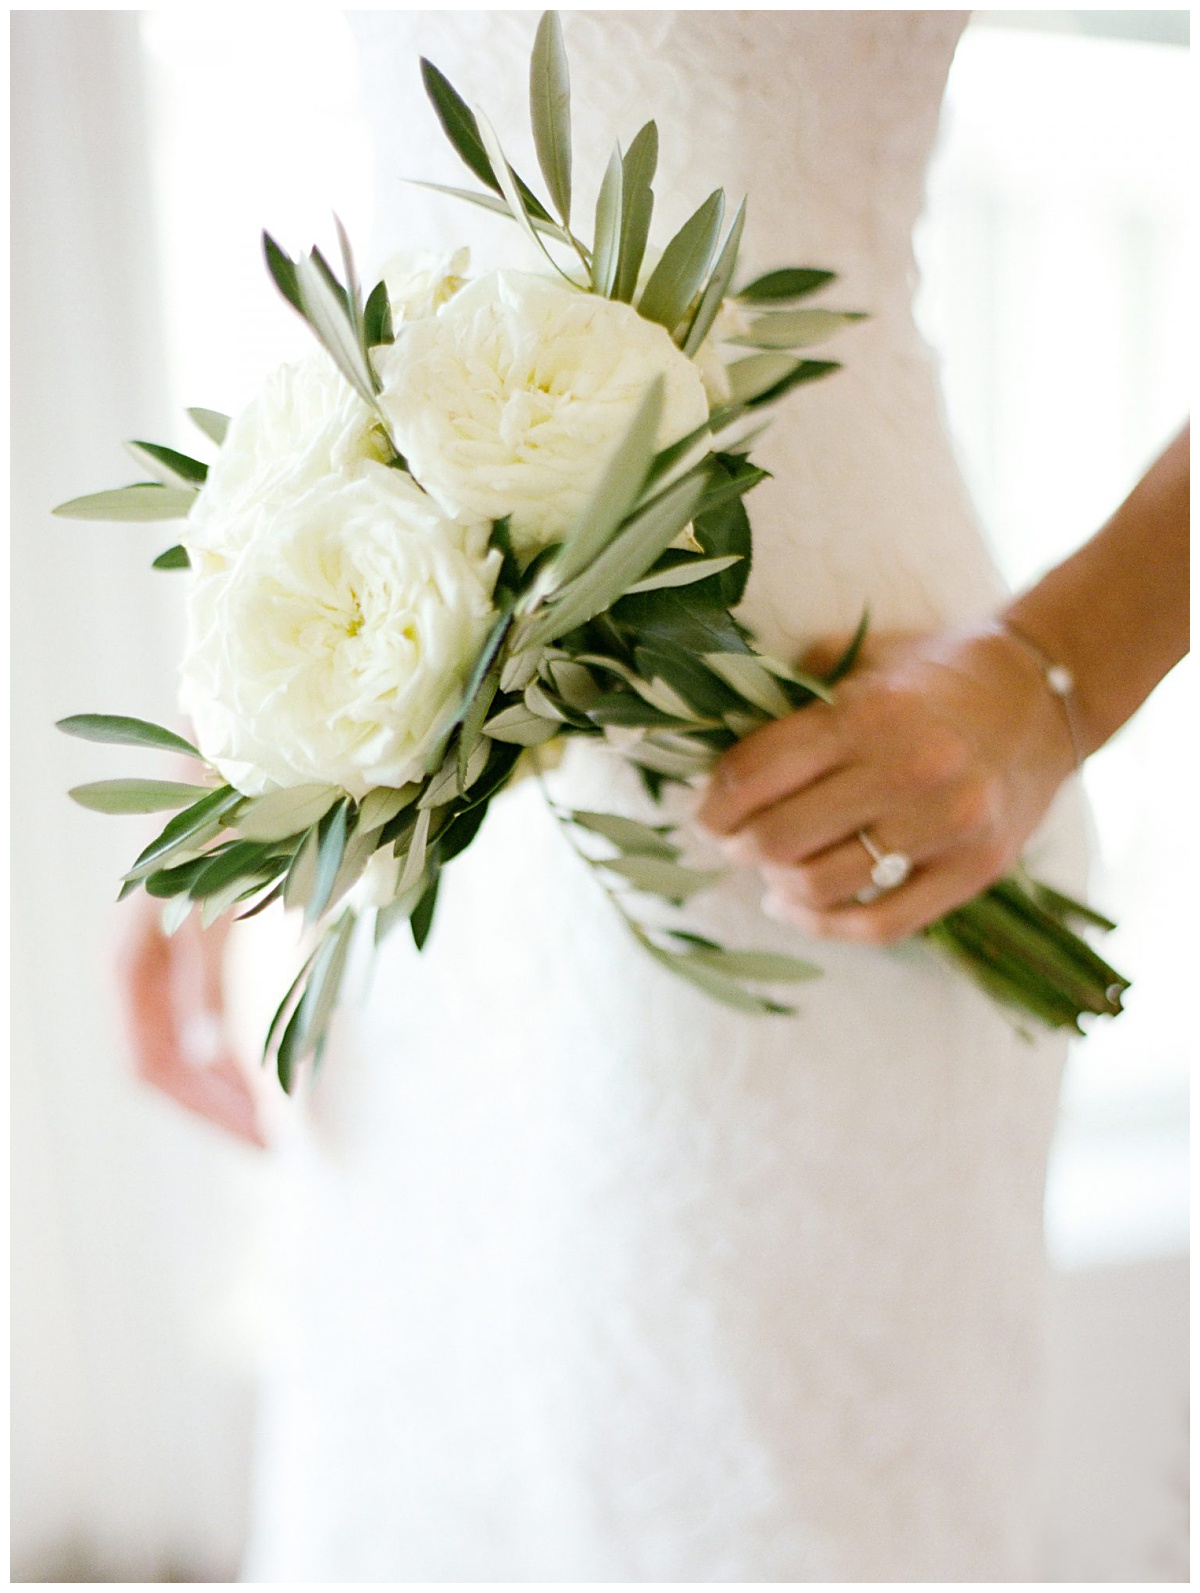 Simple modern style Bridal bouquet image from marthastewart.com. Guide to bridal bouquet styles at Emery's Buffalo Creek 